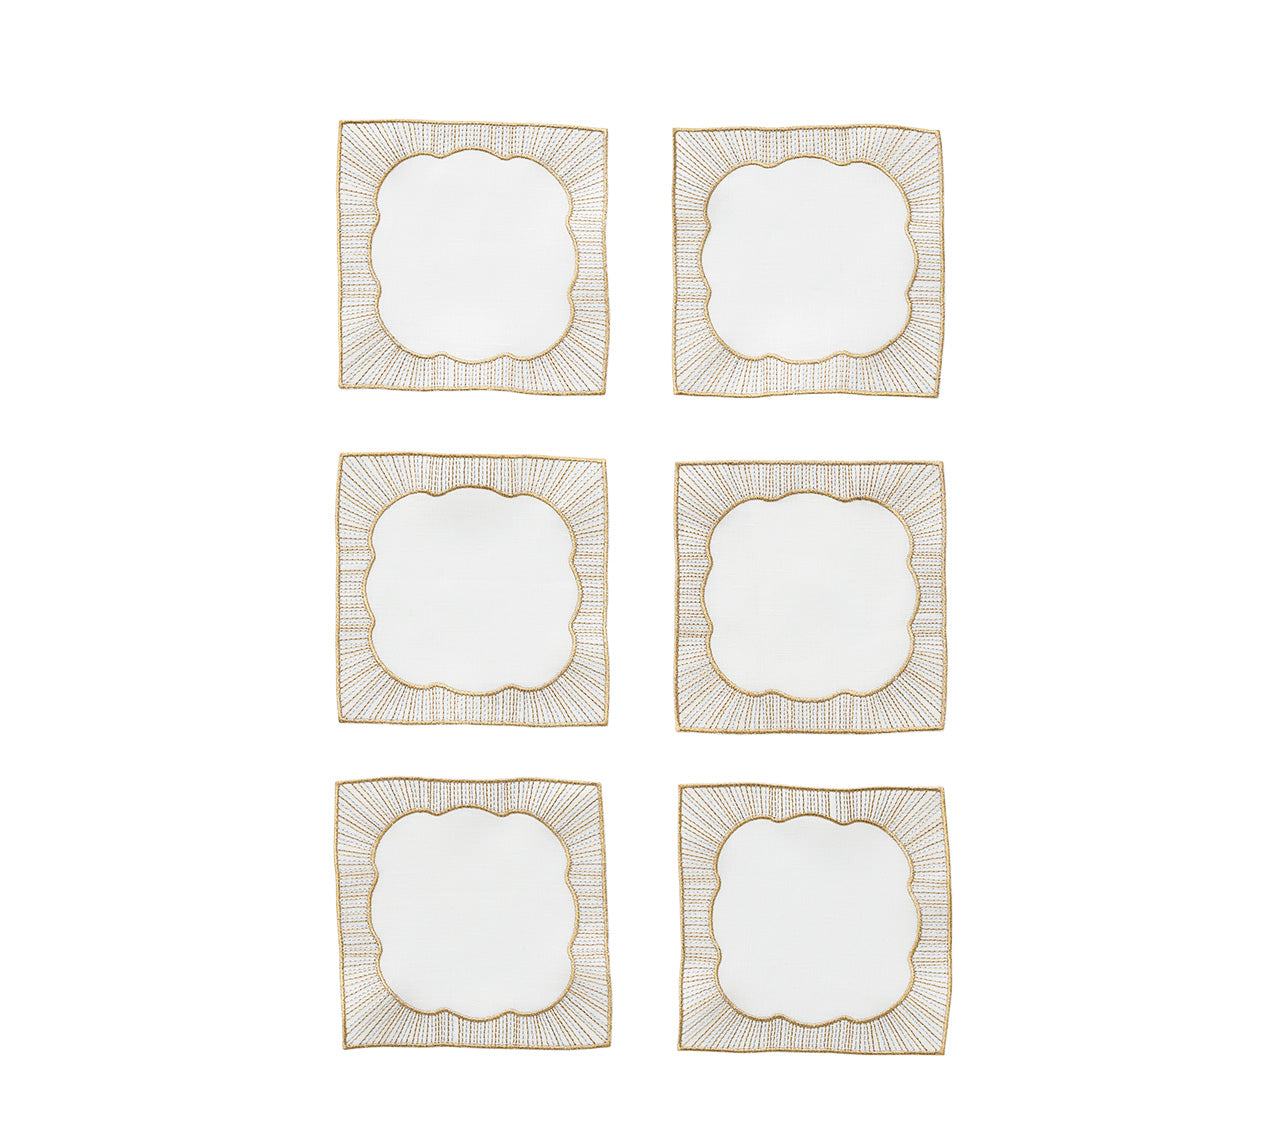 Frame Cocktail Napkins in White, Gold & Silver, Set of 6 in a Gift Box